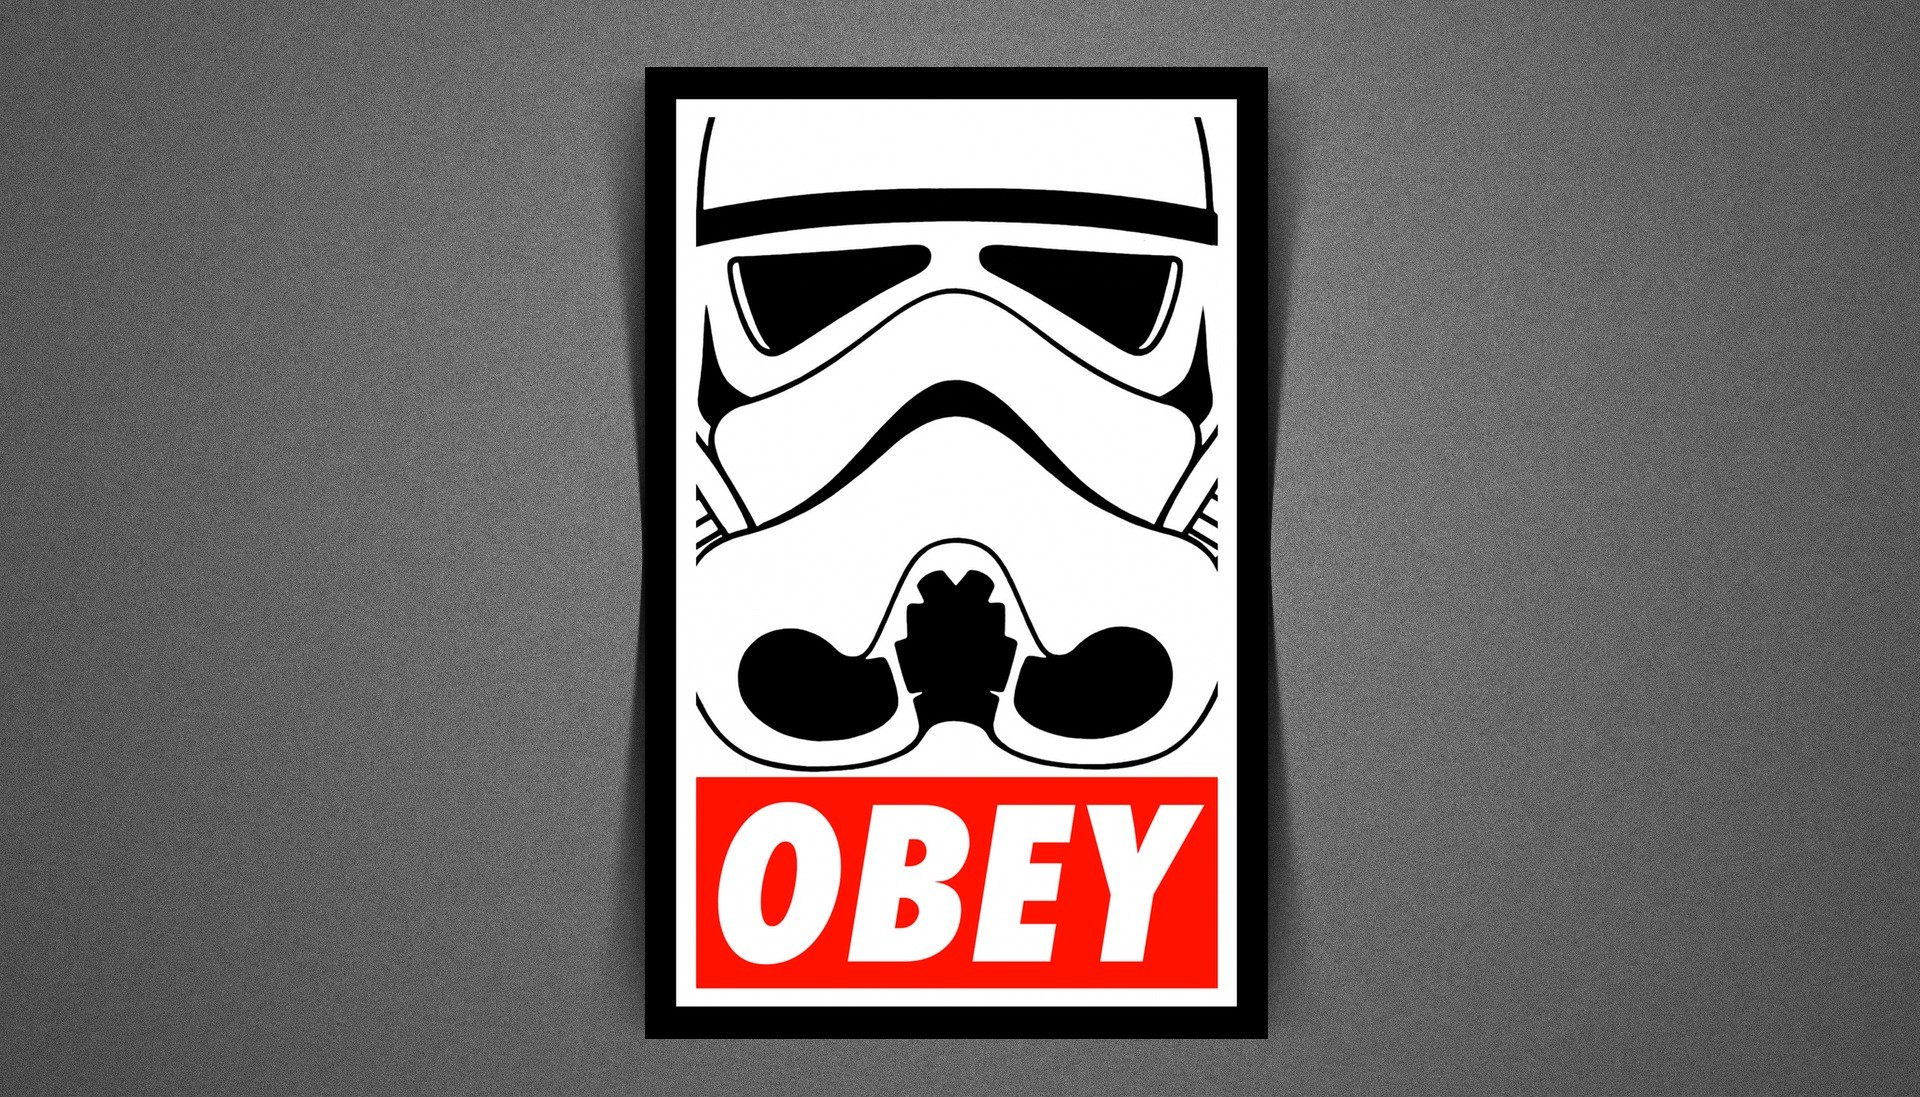 Obey Wallpaper Download Free Awesome Wallpapers For HD Wallpapers Download Free Map Images Wallpaper [wallpaper376.blogspot.com]